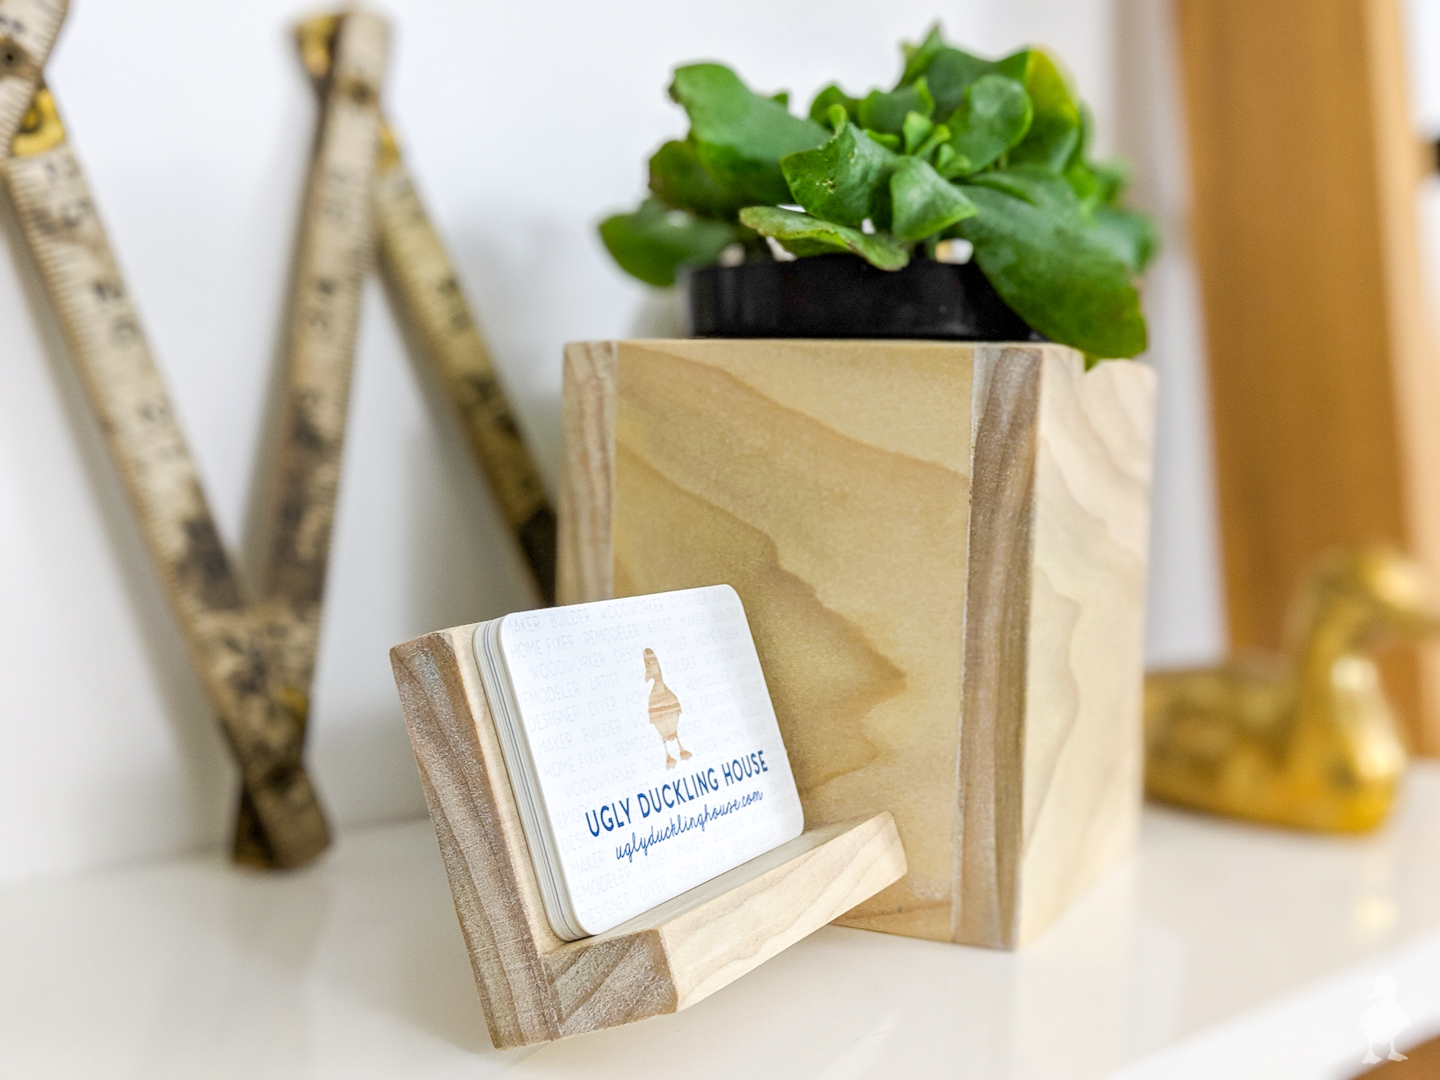 planter for desk accessory - planter with business card holder